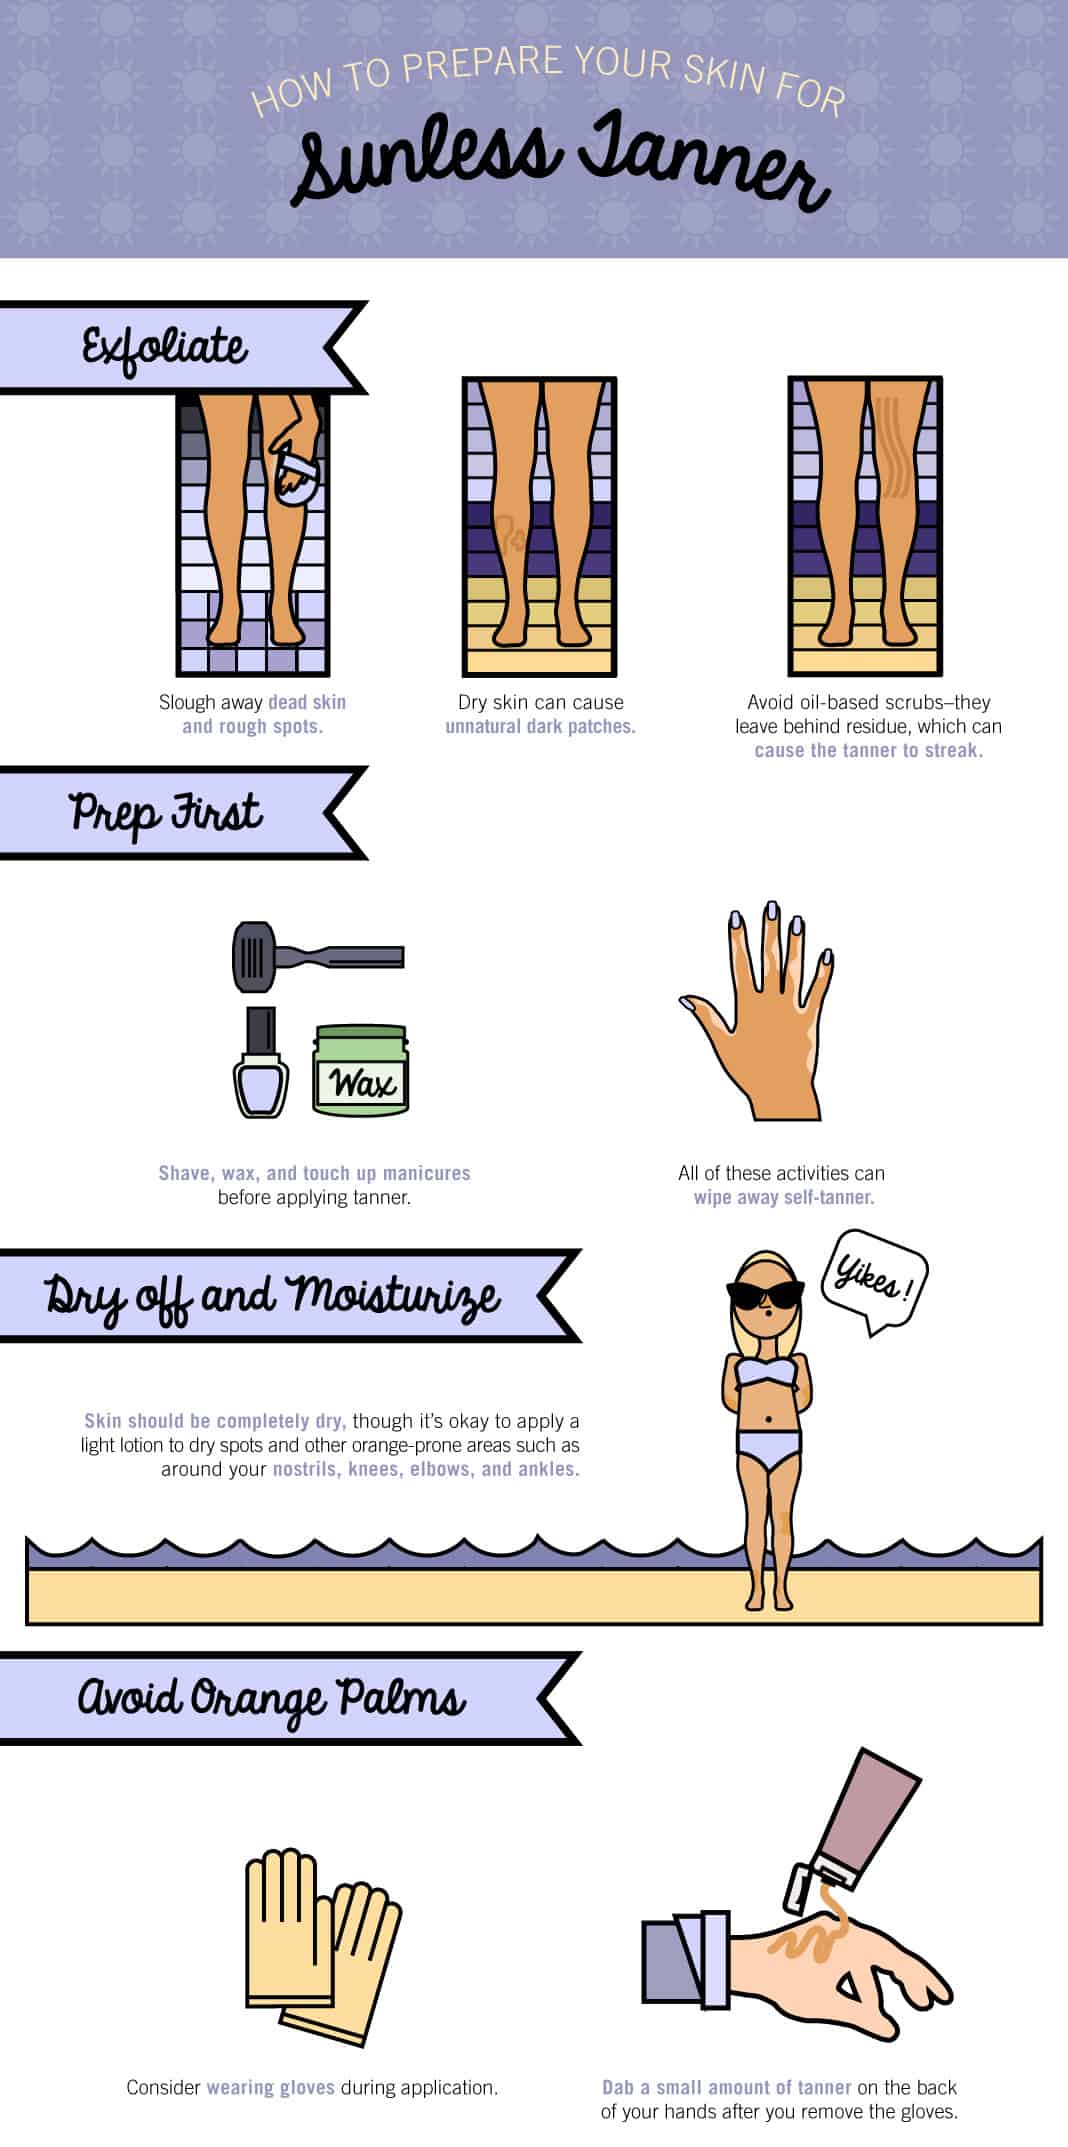 How to Prepare Your Skin for Sunless Tanner